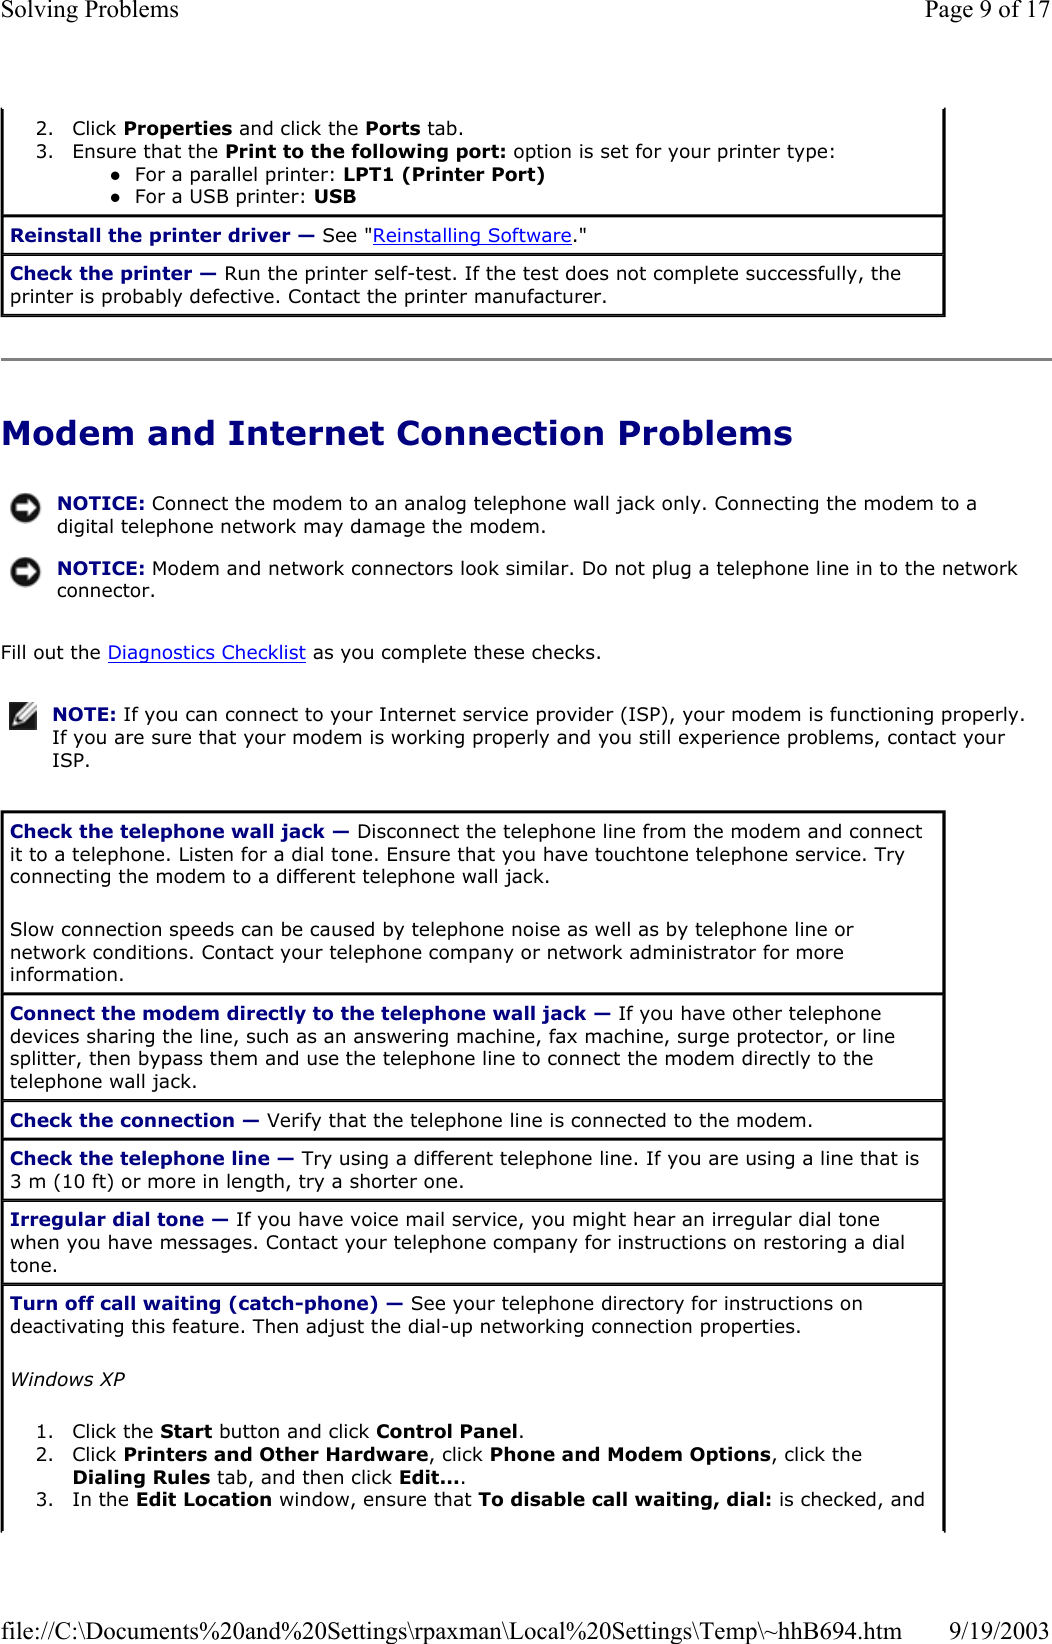 Modem and Internet Connection Problems Fill out the Diagnostics Checklist as you complete these checks. 2. Click Properties and click the Ports tab.  3. Ensure that the Print to the following port: option is set for your printer type: zFor a parallel printer: LPT1 (Printer Port)  zFor a USB printer: USB  Reinstall the printer driver — See &quot;Reinstalling Software.&quot; Check the printer — Run the printer self-test. If the test does not complete successfully, the printer is probably defective. Contact the printer manufacturer. NOTICE: Connect the modem to an analog telephone wall jack only. Connecting the modem to a digital telephone network may damage the modem.NOTICE: Modem and network connectors look similar. Do not plug a telephone line in to the network connector.NOTE: If you can connect to your Internet service provider (ISP), your modem is functioning properly. If you are sure that your modem is working properly and you still experience problems, contact your ISP.Check the telephone wall jack — Disconnect the telephone line from the modem and connect it to a telephone. Listen for a dial tone. Ensure that you have touchtone telephone service. Try connecting the modem to a different telephone wall jack. Slow connection speeds can be caused by telephone noise as well as by telephone line or network conditions. Contact your telephone company or network administrator for more information. Connect the modem directly to the telephone wall jack — If you have other telephone devices sharing the line, such as an answering machine, fax machine, surge protector, or line splitter, then bypass them and use the telephone line to connect the modem directly to the telephone wall jack. Check the connection — Verify that the telephone line is connected to the modem. Check the telephone line — Try using a different telephone line. If you are using a line that is 3 m (10 ft) or more in length, try a shorter one. Irregular dial tone — If you have voice mail service, you might hear an irregular dial tone when you have messages. Contact your telephone company for instructions on restoring a dial tone. Turn off call waiting (catch-phone) — See your telephone directory for instructions on deactivating this feature. Then adjust the dial-up networking connection properties. Windows XP 1. Click the Start button and click Control Panel.  2. Click Printers and Other Hardware, click Phone and Modem Options, click the Dialing Rules tab, and then click Edit....  3. In the Edit Location window, ensure that To disable call waiting, dial: is checked, and Page 9 of 17Solving Problems9/19/2003file://C:\Documents%20and%20Settings\rpaxman\Local%20Settings\Temp\~hhB694.htm